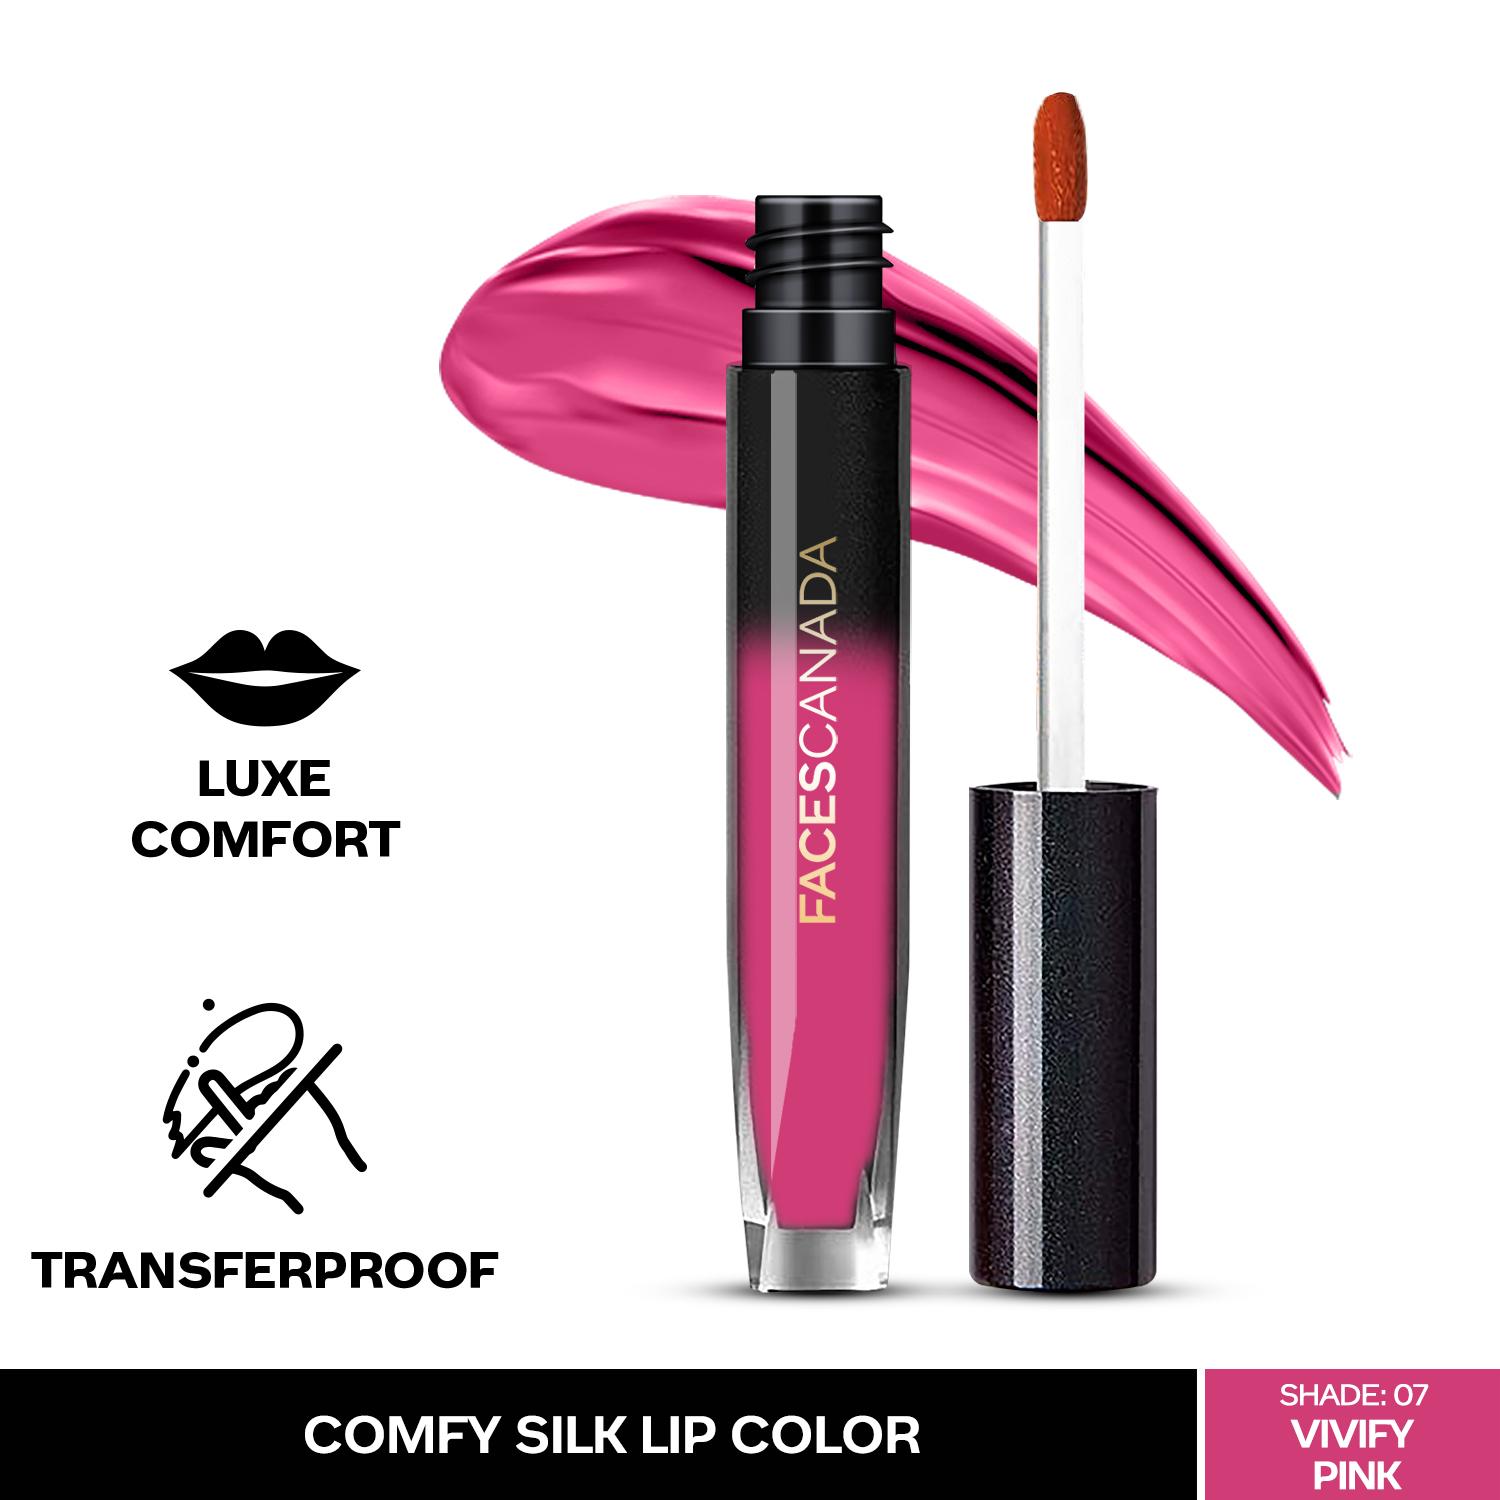 Faces Canada | Faces Canada Comfy Silk Lip Color I Mulberry Oil, Luxe Comfort, No Dryness I Vivify Pink 07 (3 ml)